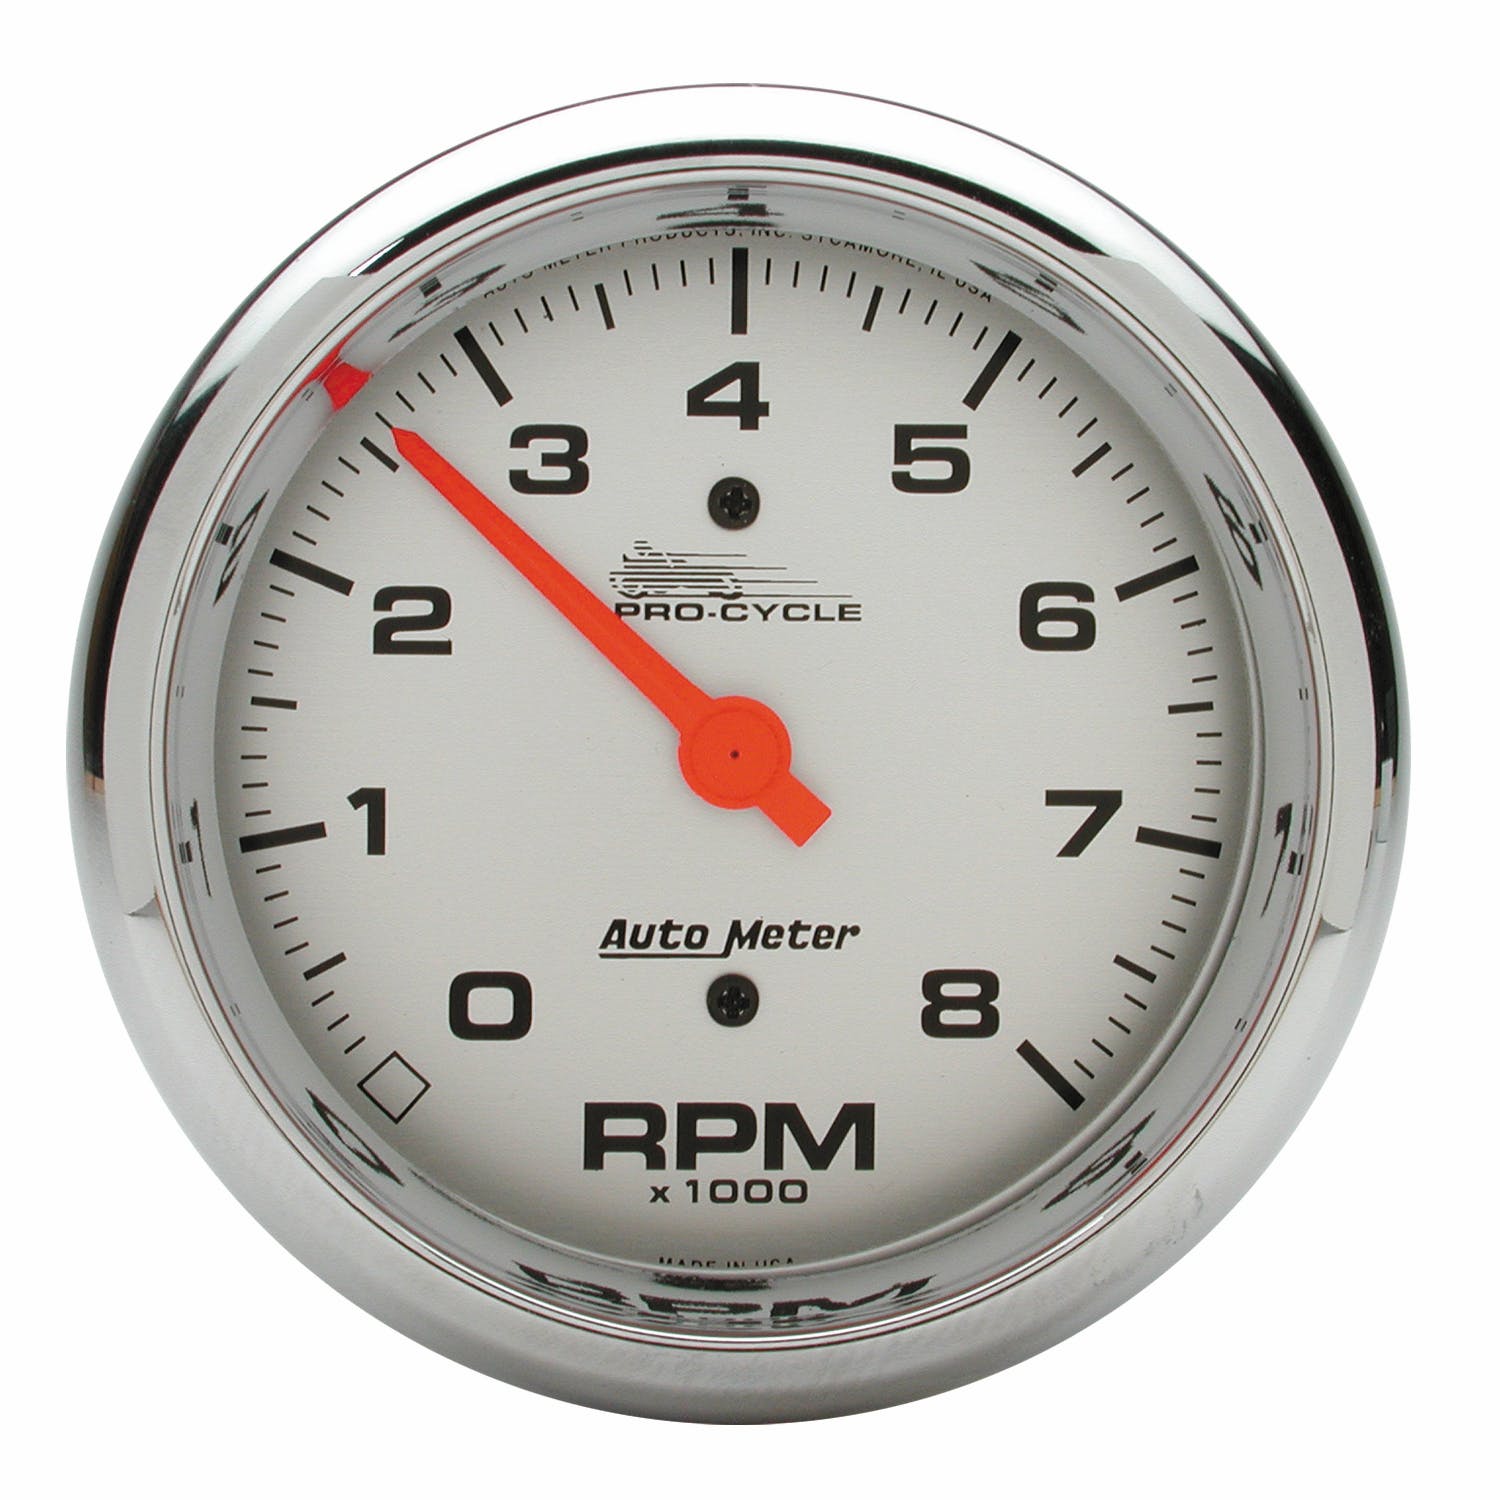 AutoMeter Products 19302 Tachometer Gauge, Silver-Pro Cycle 3 3/4, 8K RPM, 2and4 Cylinder